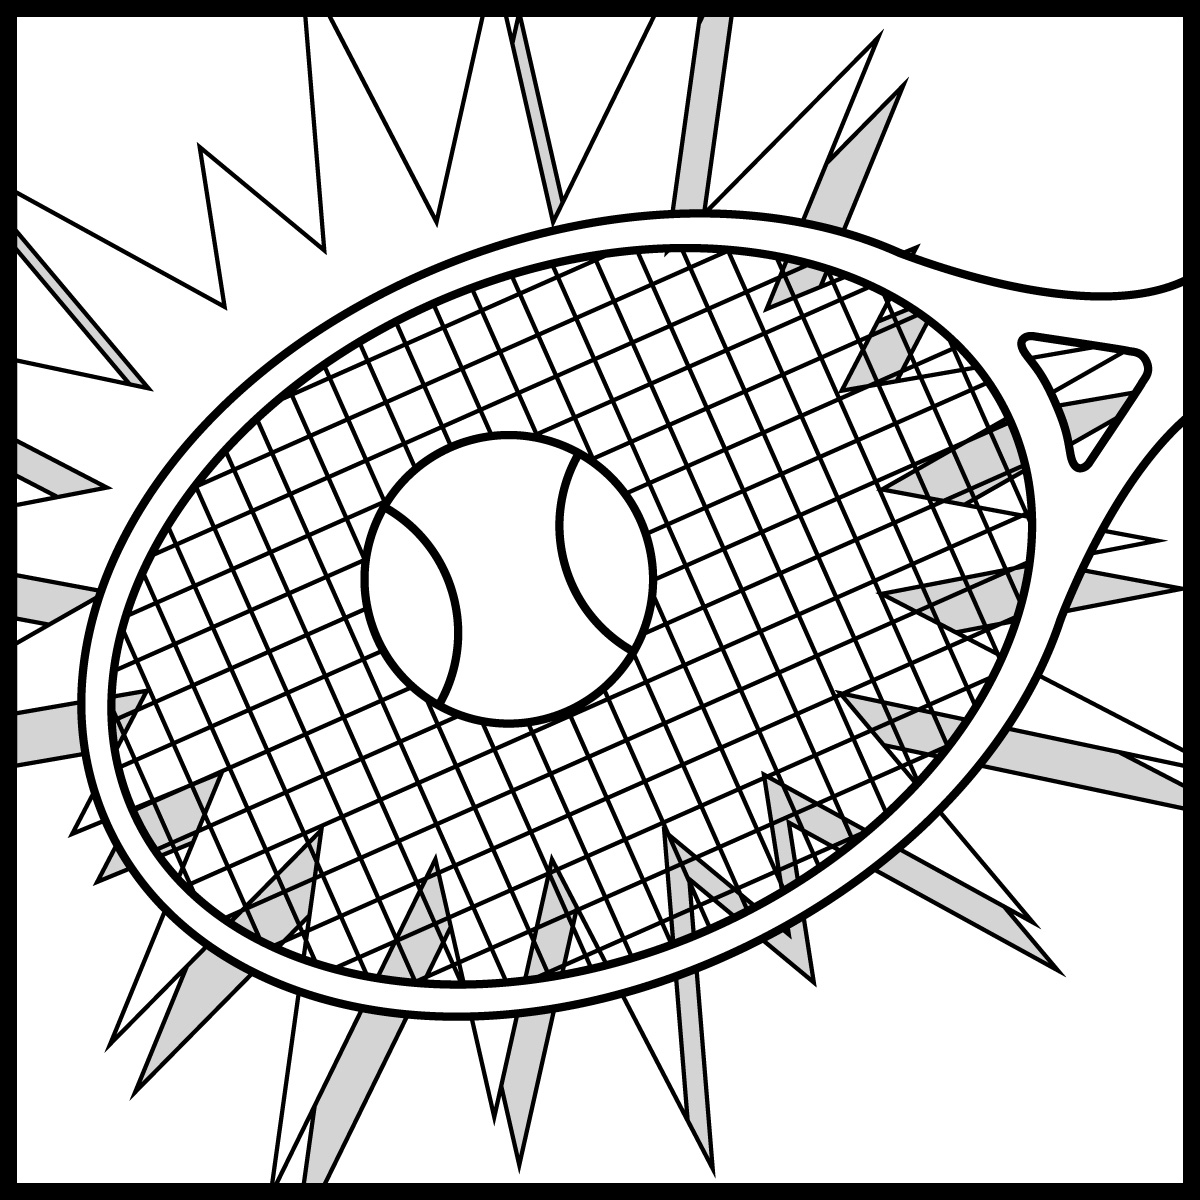  Training coloring pages | training Tennis